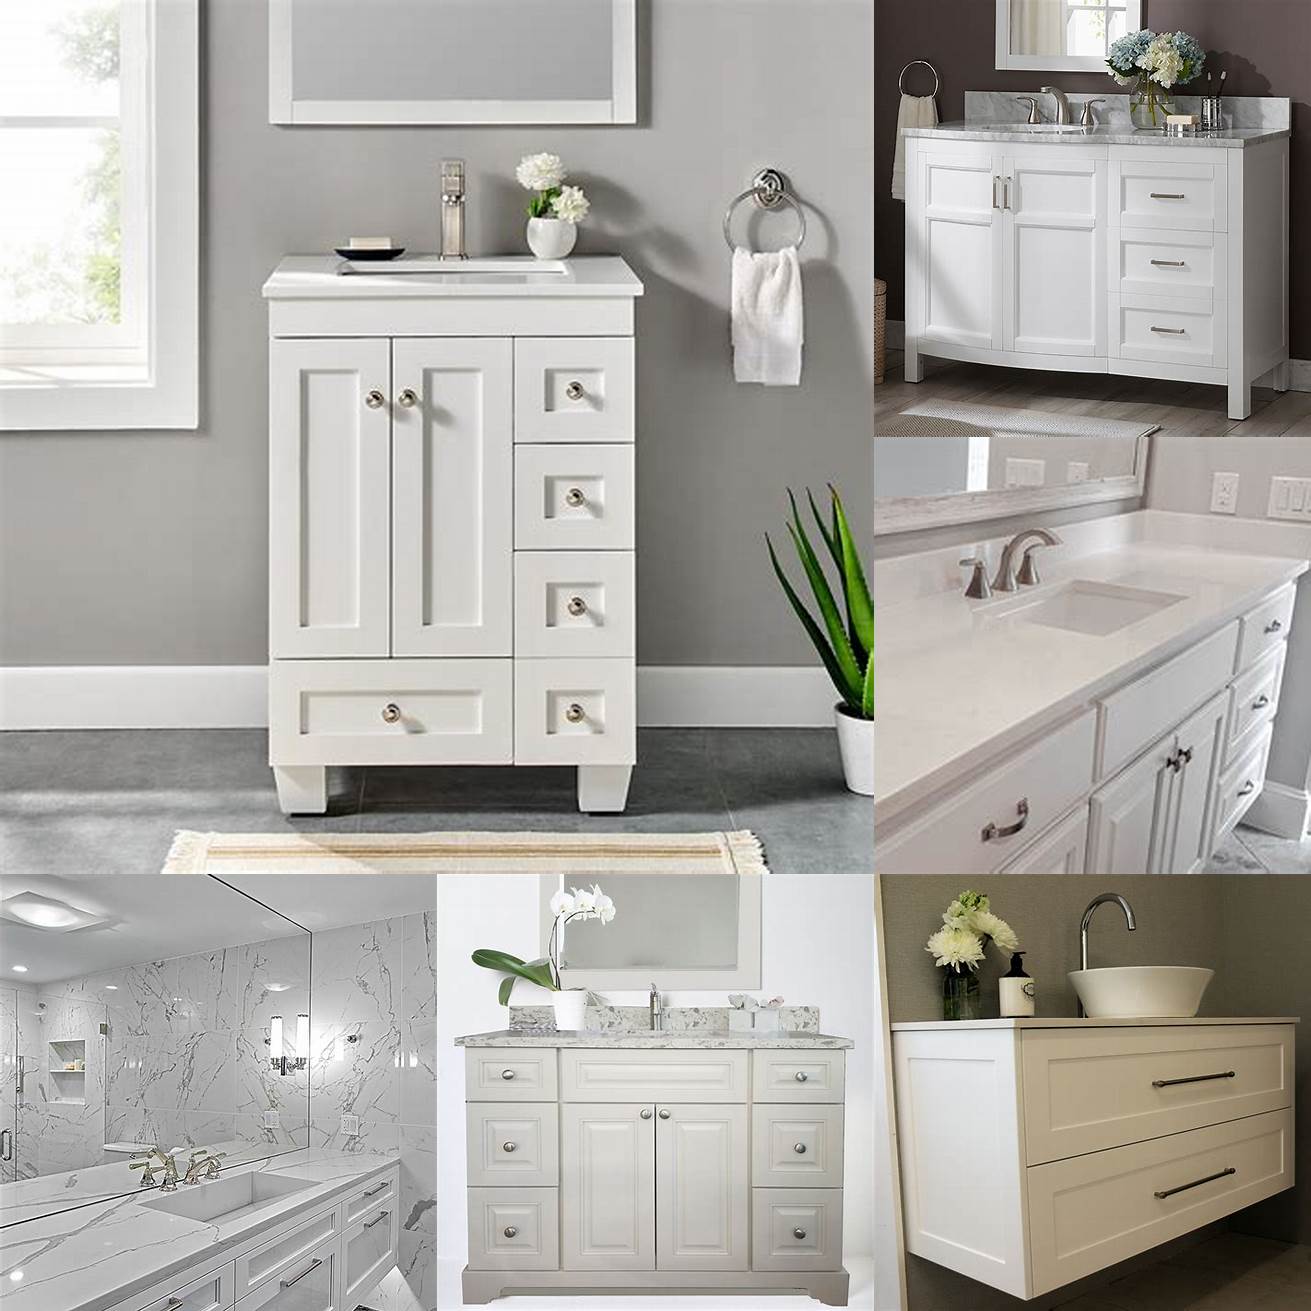 A white vanity with a quartz countertop and shaker-style drawers